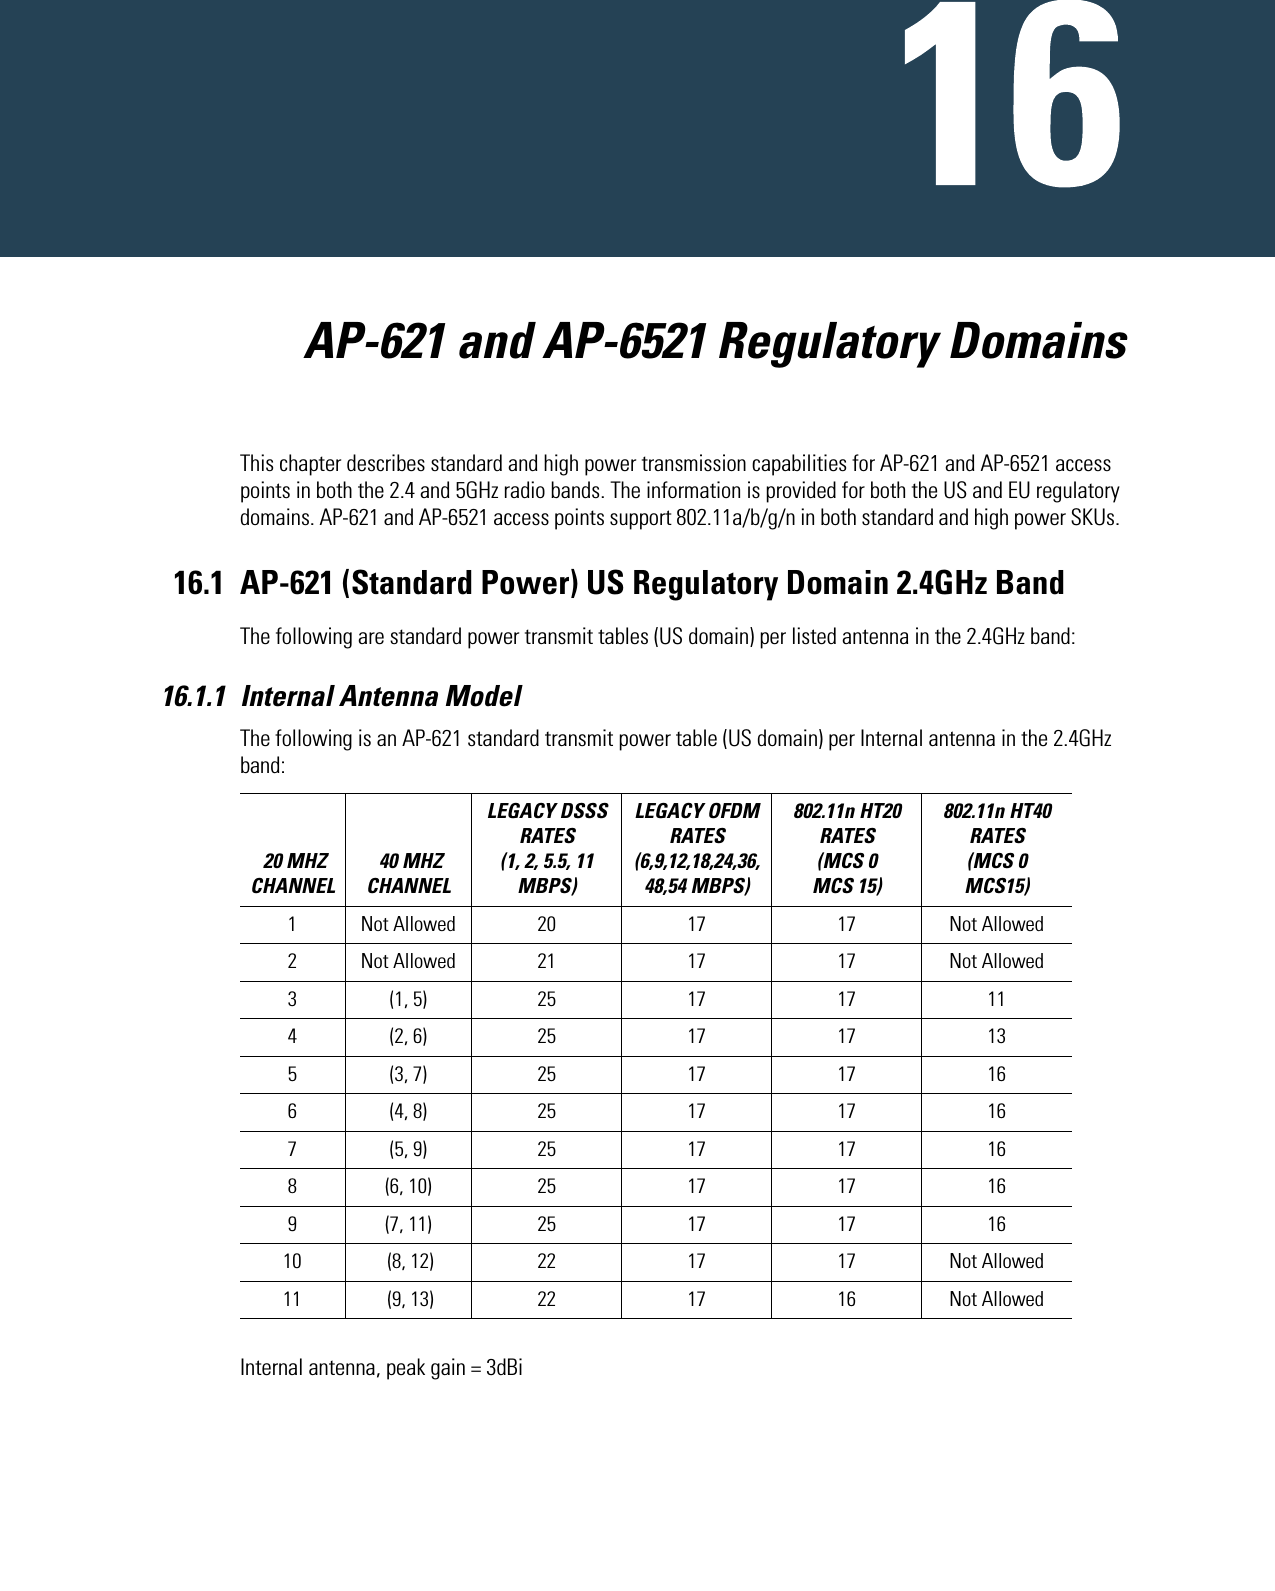           AP-621 and AP-6521 Regulatory DomainsThis chapter describes standard and high power transmission capabilities for AP-621 and AP-6521 access points in both the 2.4 and 5GHz radio bands. The information is provided for both the US and EU regulatory domains. AP-621 and AP-6521 access points support 802.11a/b/g/n in both standard and high power SKUs. 16.1 AP-621 (Standard Power) US Regulatory Domain 2.4GHz BandThe following are standard power transmit tables (US domain) per listed antenna in the 2.4GHz band:16.1.1 Internal Antenna Model The following is an AP-621 standard transmit power table (US domain) per Internal antenna in the 2.4GHz band:Internal antenna, peak gain = 3dBi 20 MHZ CHANNEL 40 MHZ CHANNELLEGACY DSSS RATES (1, 2, 5.5, 11 MBPS) LEGACY OFDM RATES (6,9,12,18,24,36,48,54 MBPS) 802.11n HT20 RATES (MCS 0   MCS 15)802.11n HT40 RATES (MCS 0   MCS15) 1 Not Allowed 20 17 17 Not Allowed2 Not Allowed 21 17 17 Not Allowed3 (1, 5) 25 17 17 114 (2, 6) 25 17 17 135 (3, 7) 25 17 17 166 (4, 8) 25 17 17 167 (5, 9) 25 17 17 168 (6, 10) 25 17 17 169 (7, 11) 25 17 17 1610  (8, 12) 22 17 17 Not Allowed11  (9, 13) 22 17 16 Not Allowed